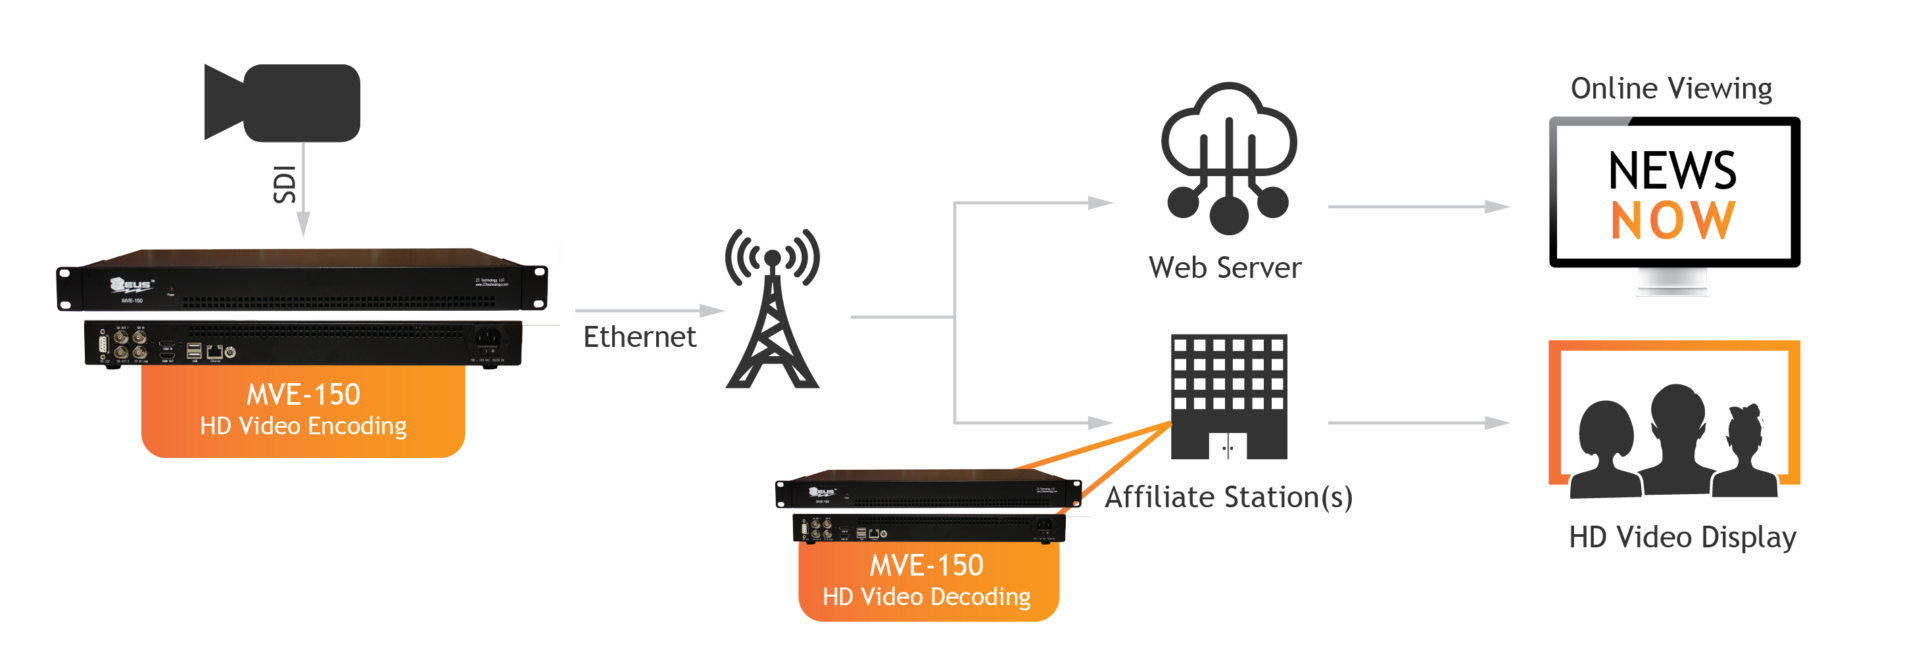 Broadcast Video Encoding with the MVE-150